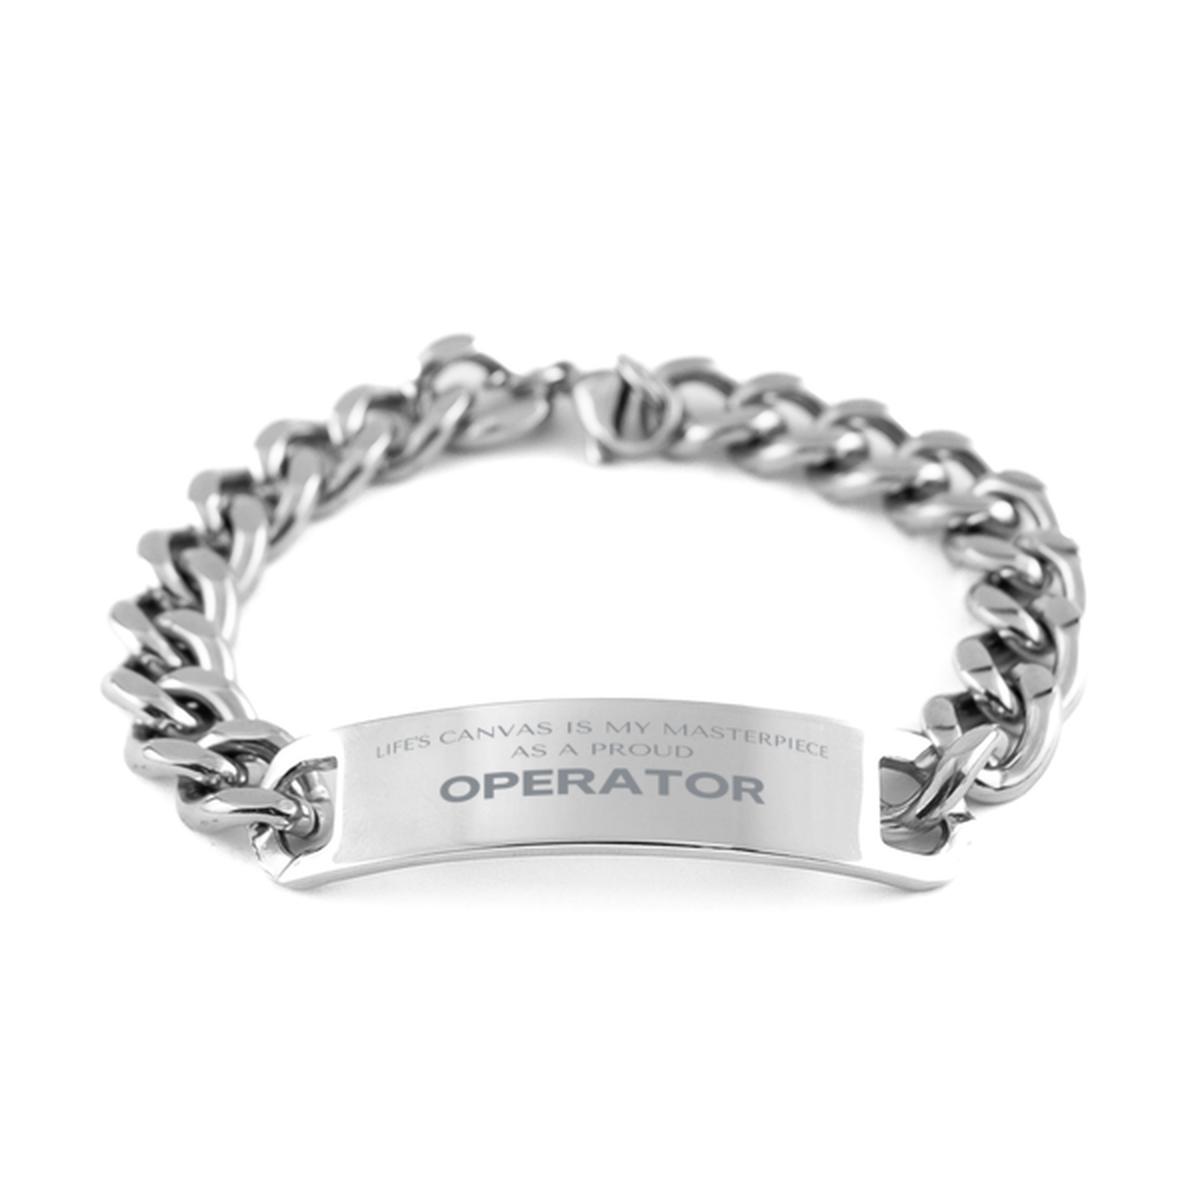 Proud Operator Gifts, Life's canvas is my masterpiece, Epic Birthday Christmas Unique Cuban Chain Stainless Steel Bracelet For Operator, Coworkers, Men, Women, Friends